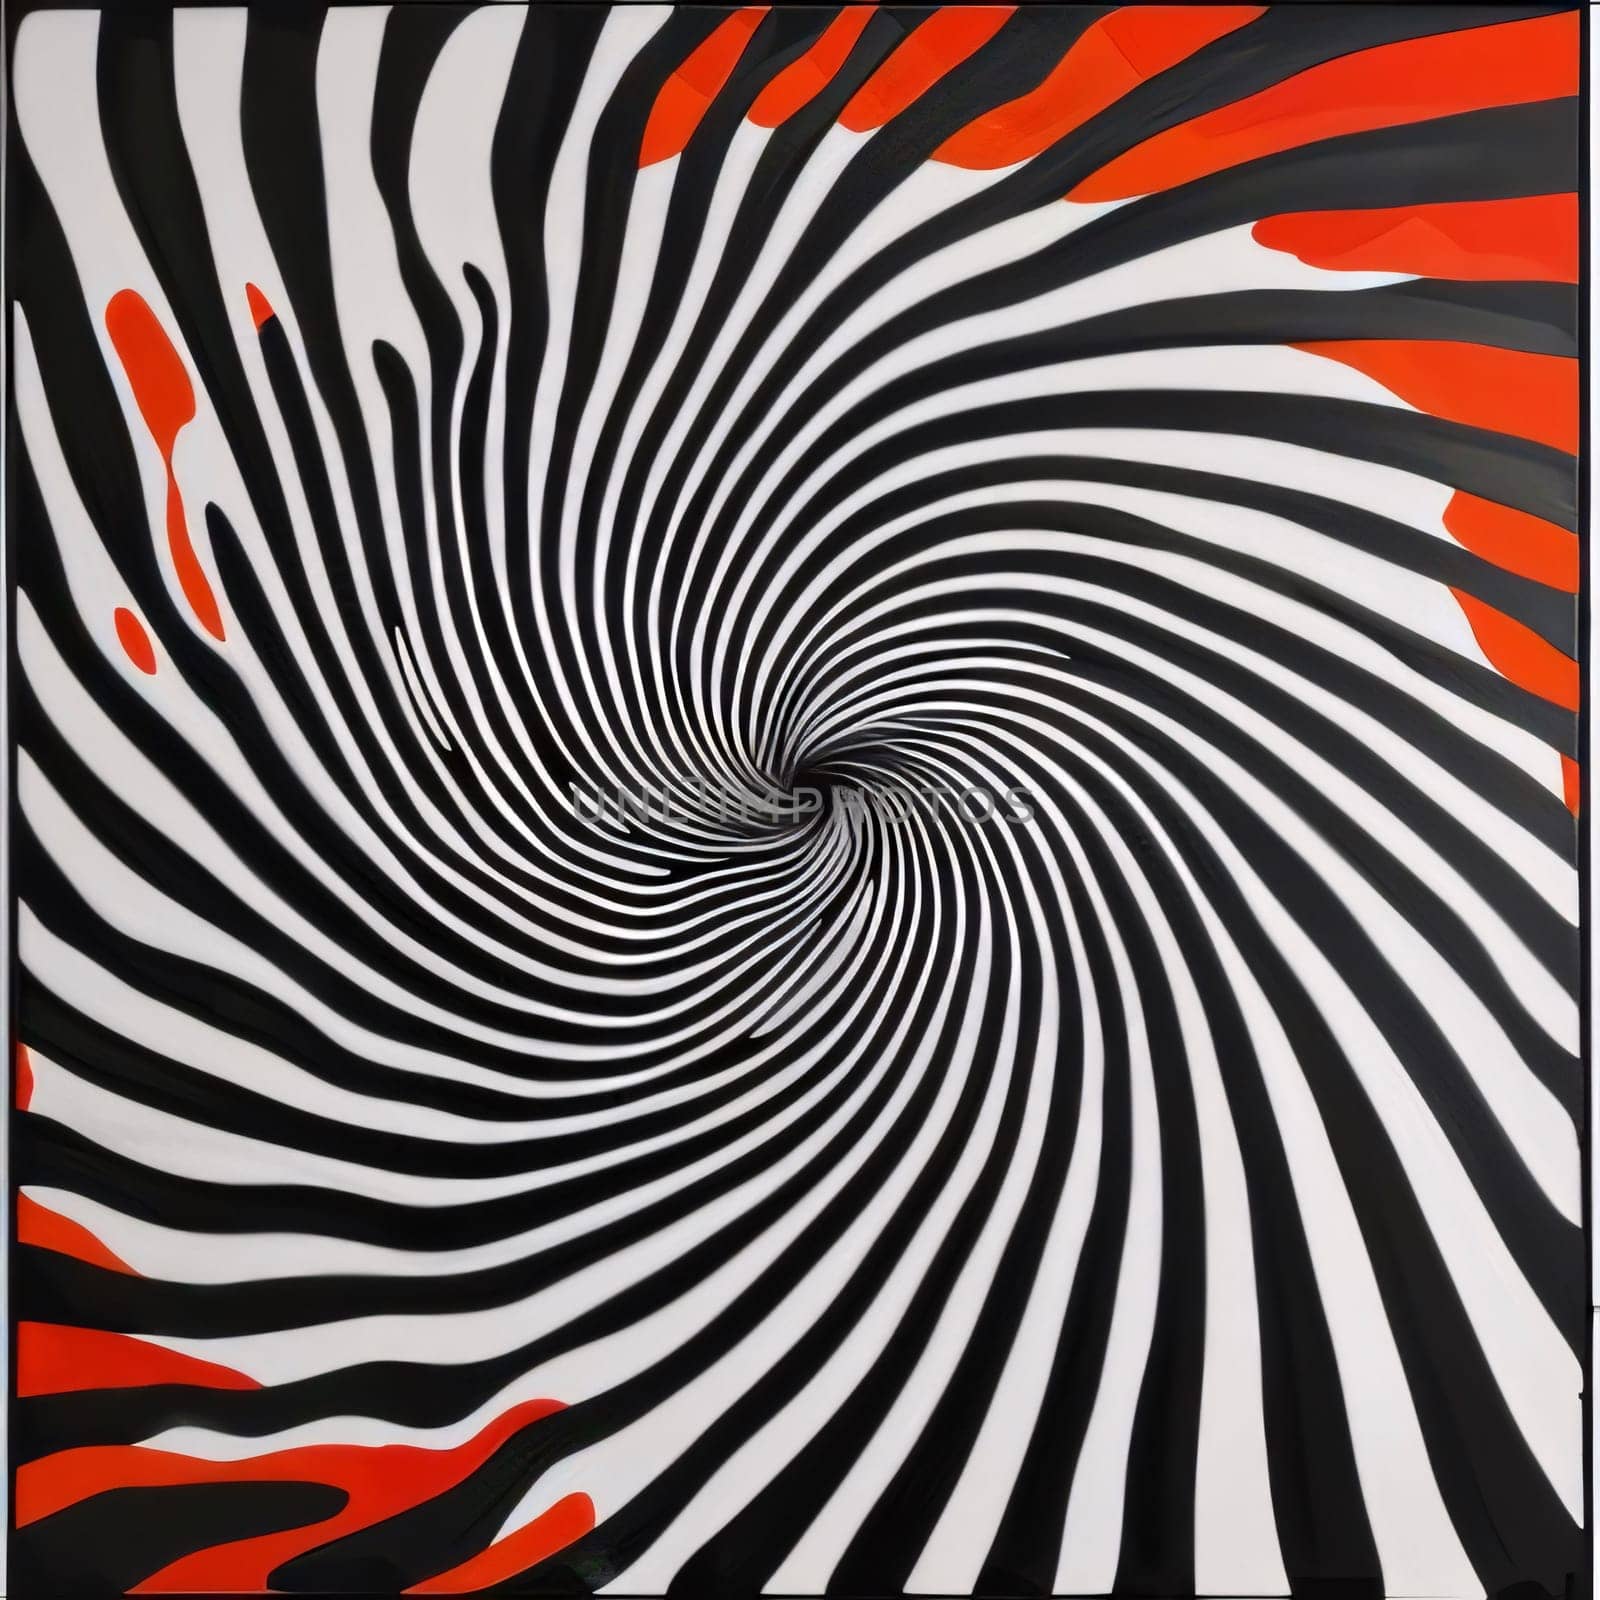 Abstract black and red spiral background. Vector illustration for your design. by ThemesS